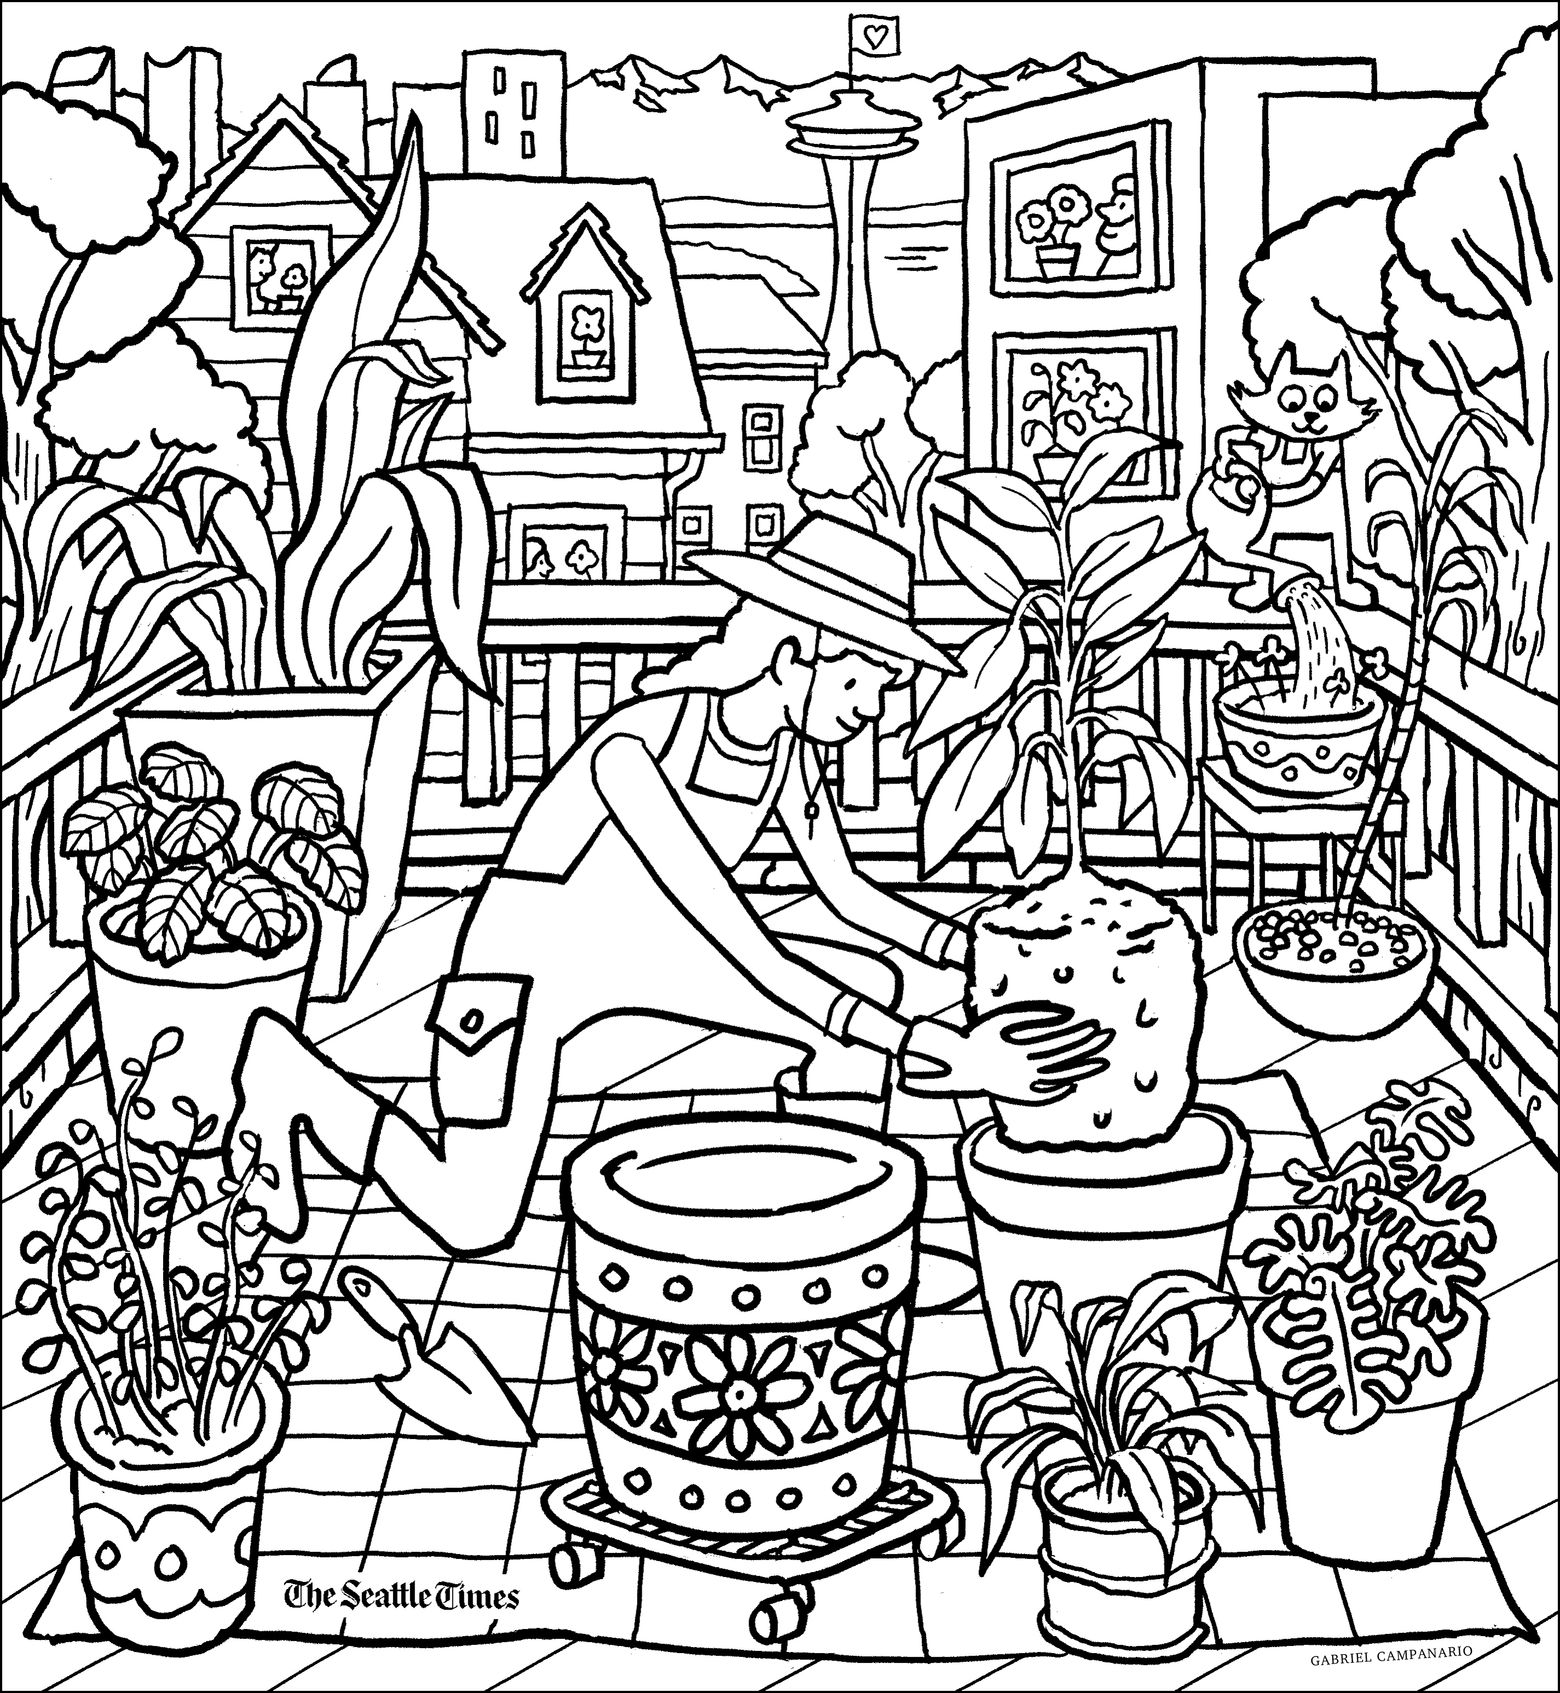 Hey kids, download and color our Seattle themed coloring page of ...